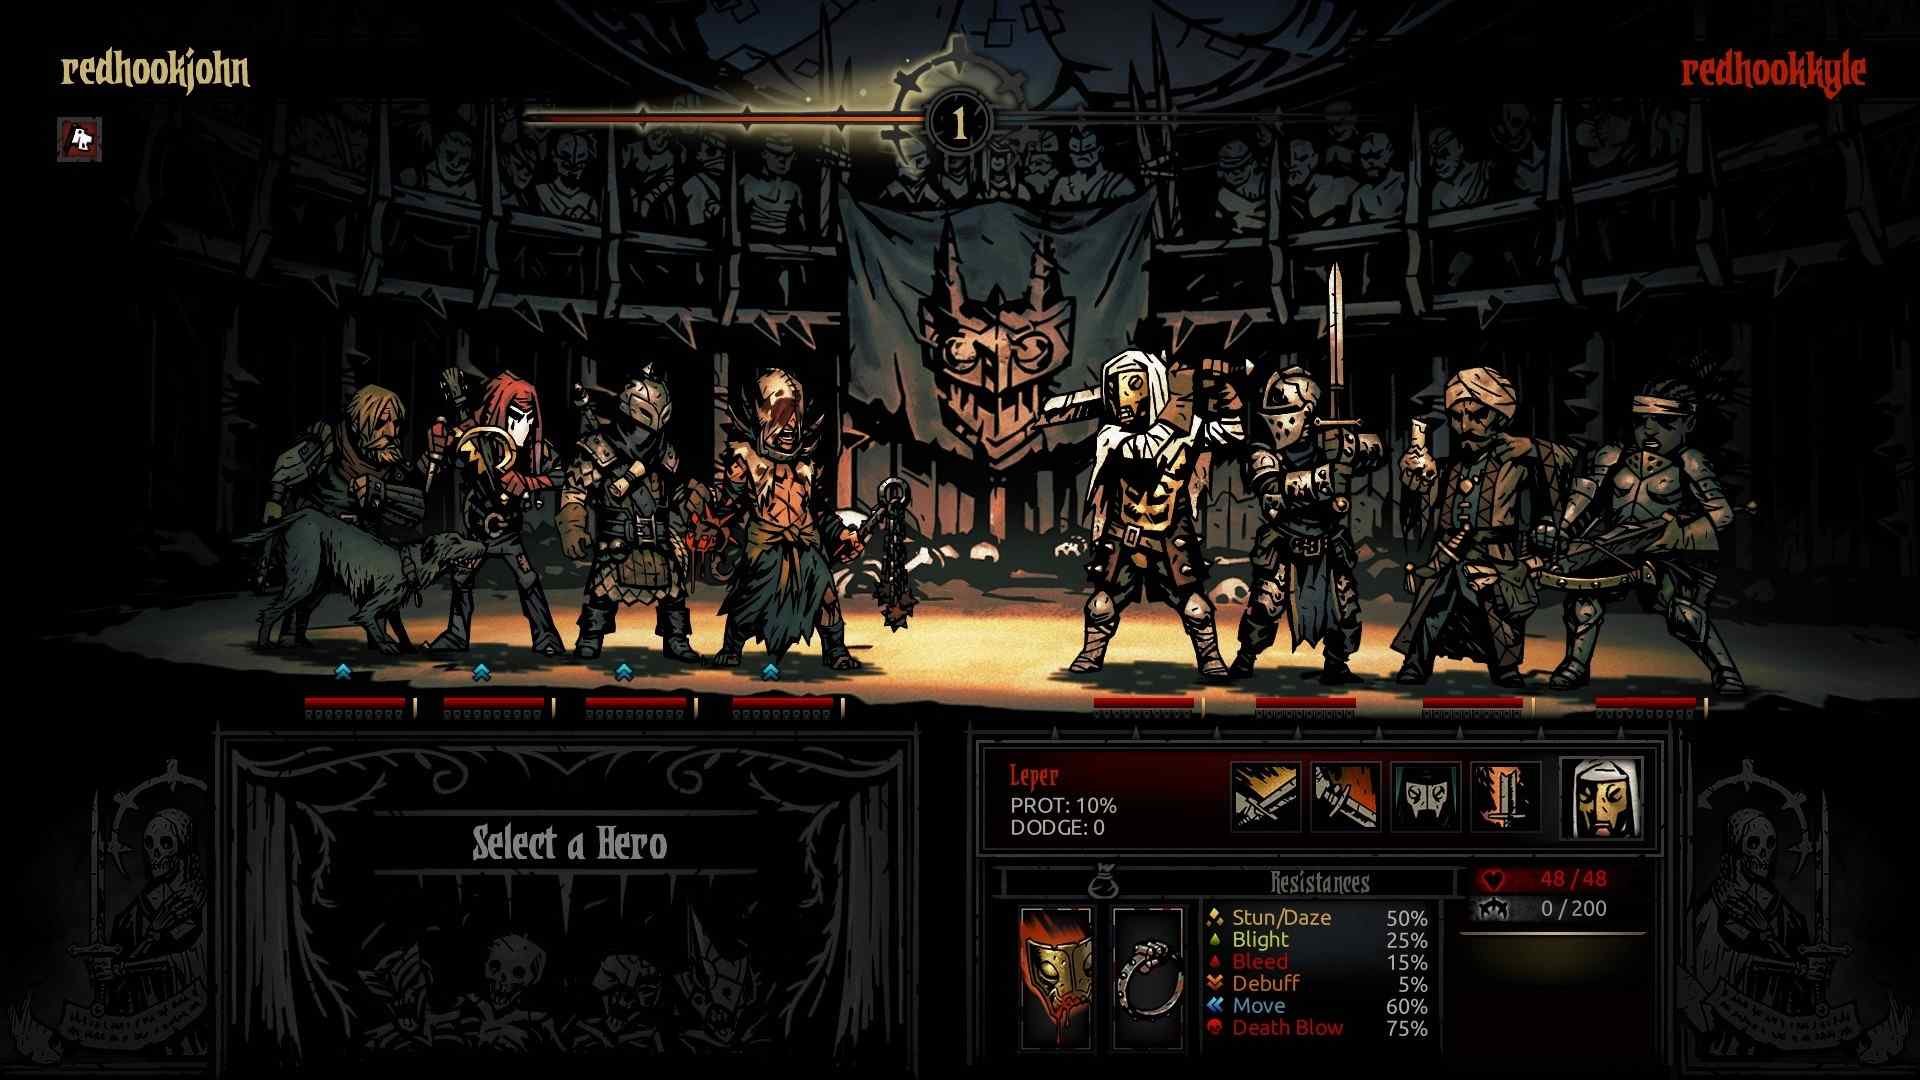 Darkest Dungeon also has an exciting style of dark and gritty art.